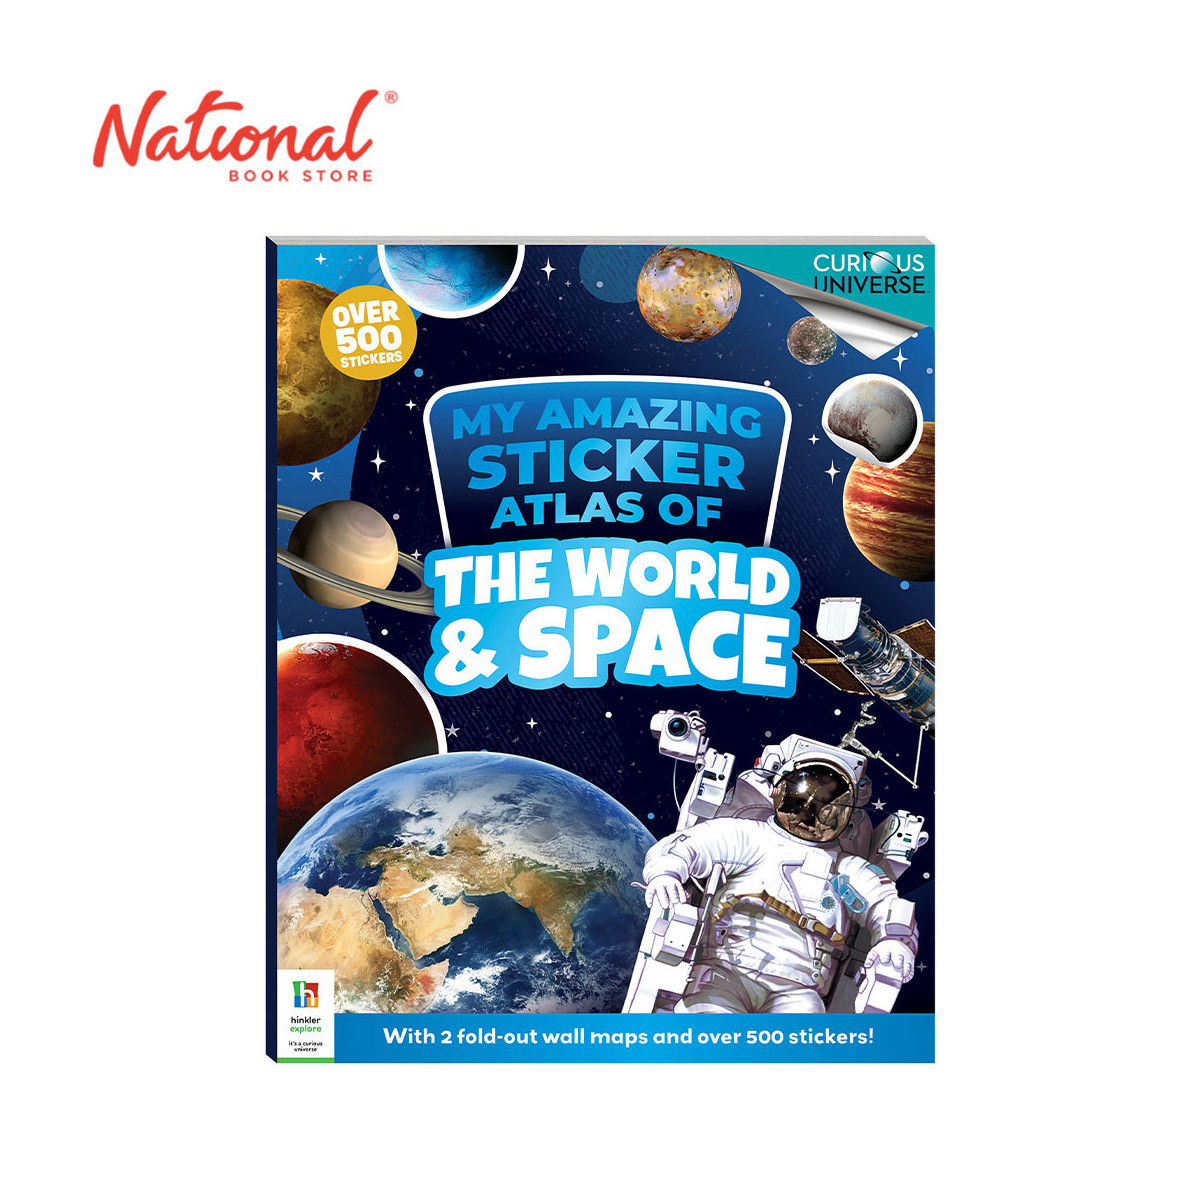 My Amazing Sticker Atlas of The World and Space - Trade Paperback - Reference Book for Kids